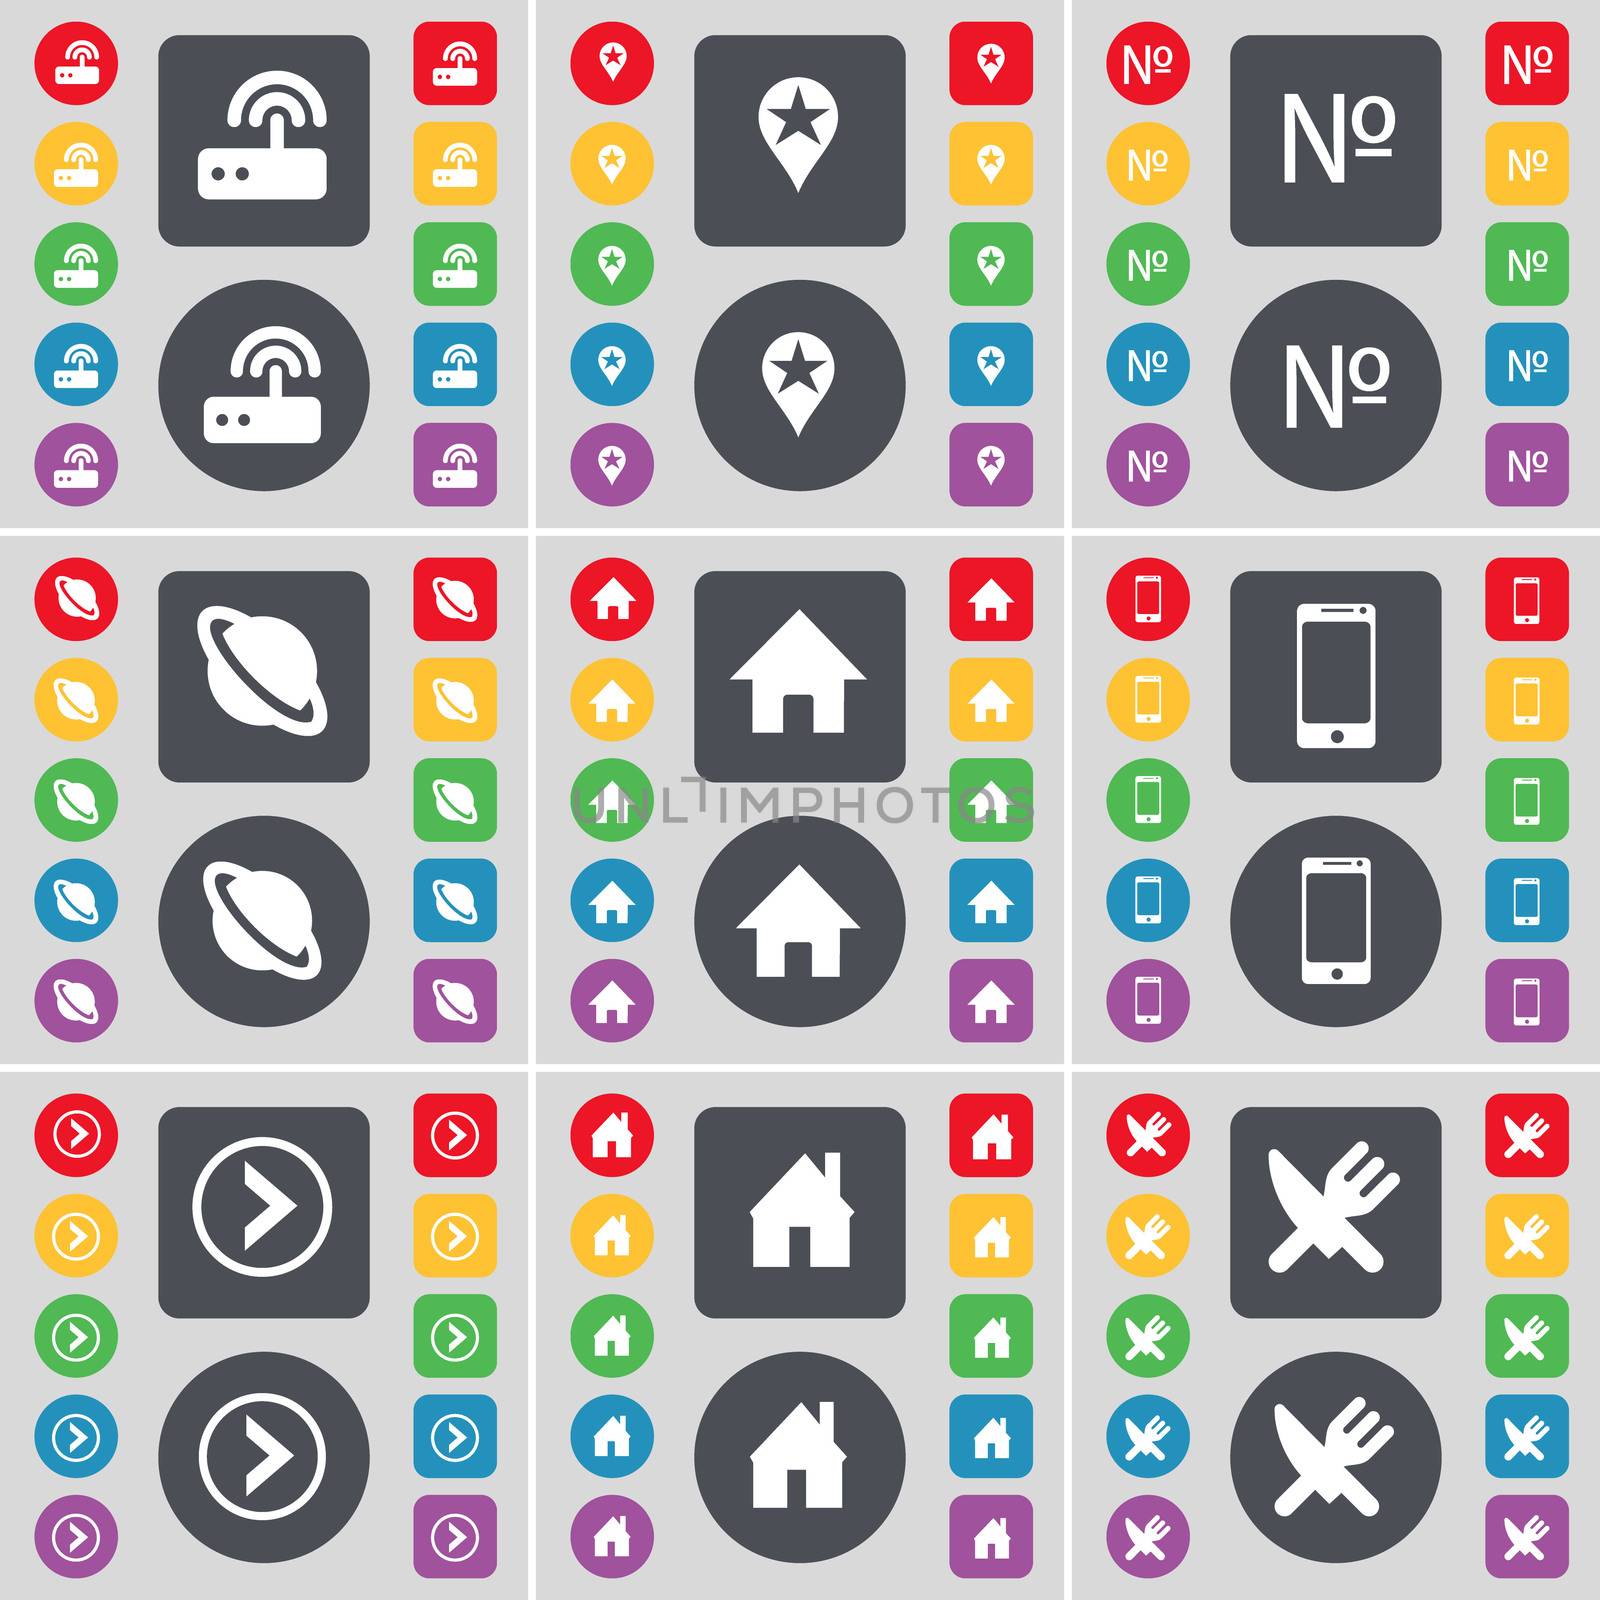 Router, Checkpoint, Number, Planet, House, Smartphone, Arrow right, House, Fork and knife icon symbol. A large set of flat, colored buttons for your design.  by serhii_lohvyniuk